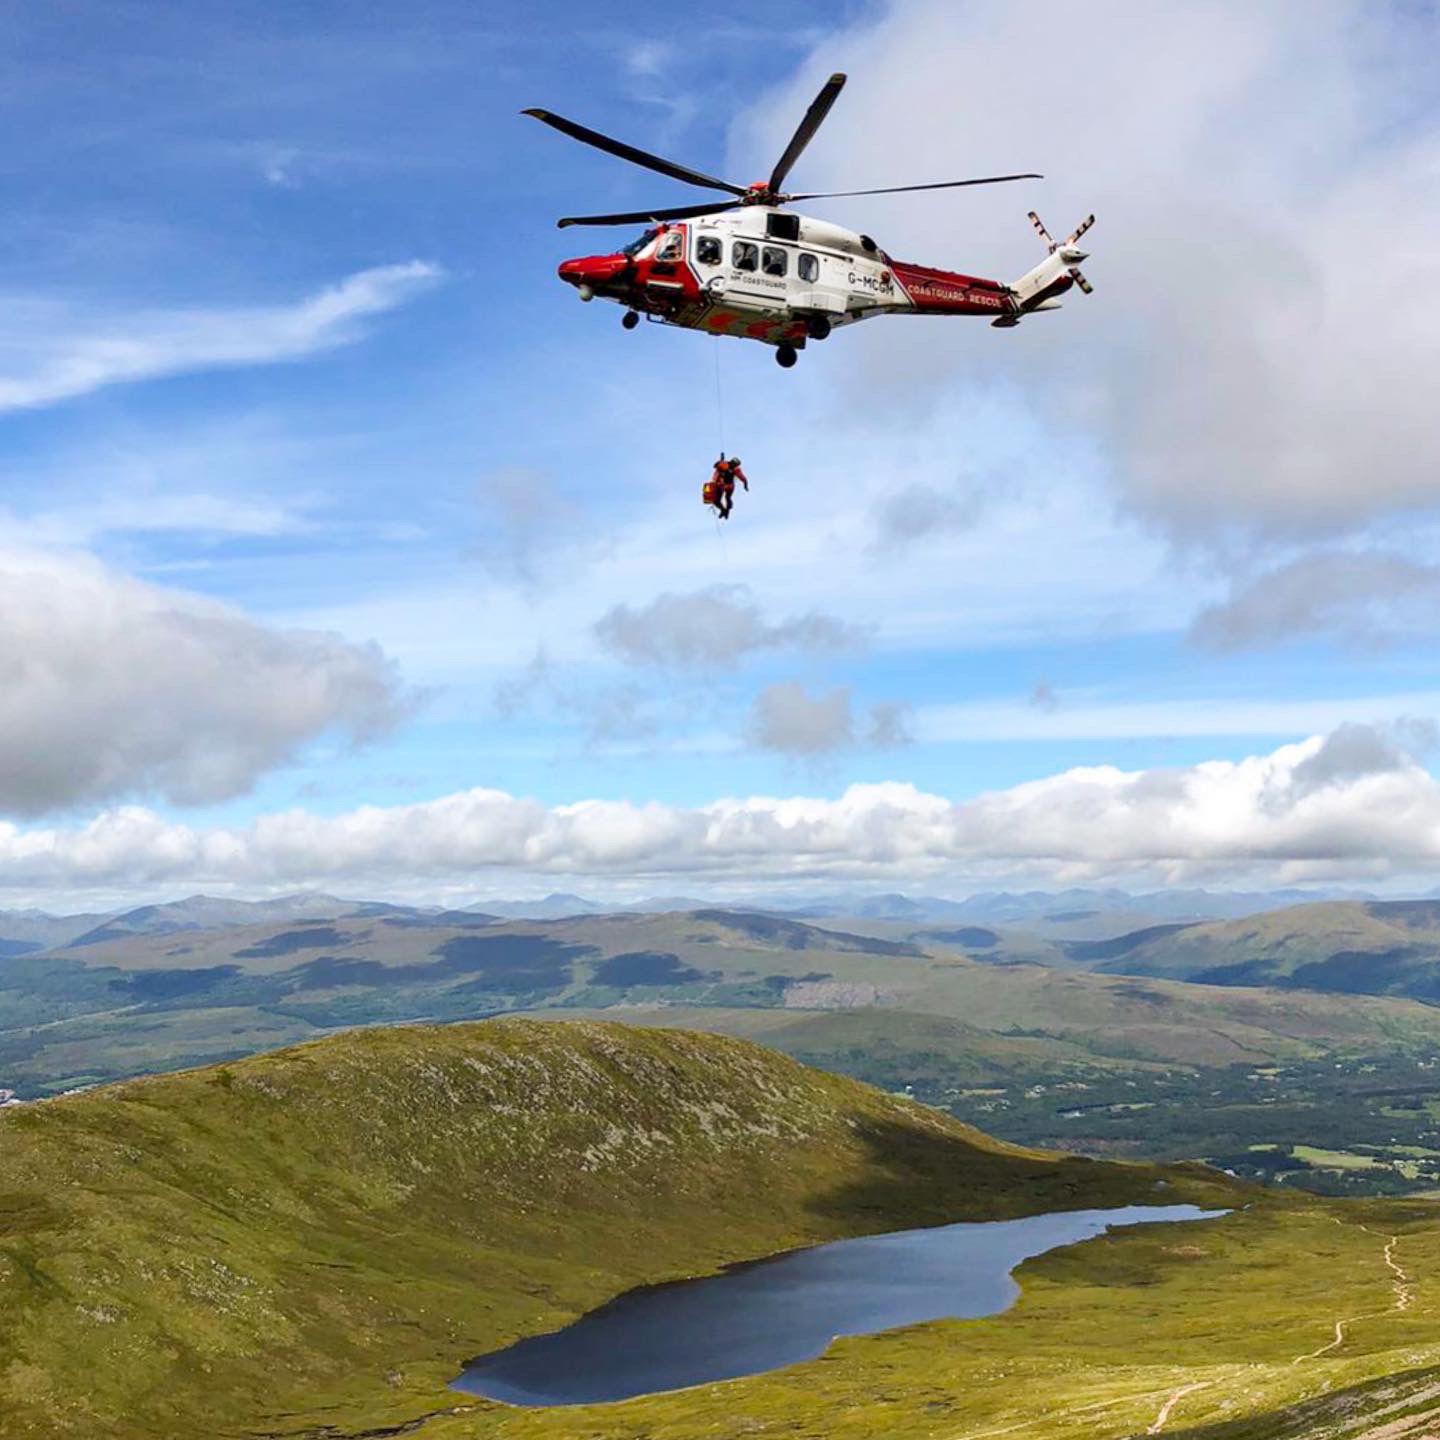 In August, the pair took on the summit to raise money for Mountain Rescue Teams